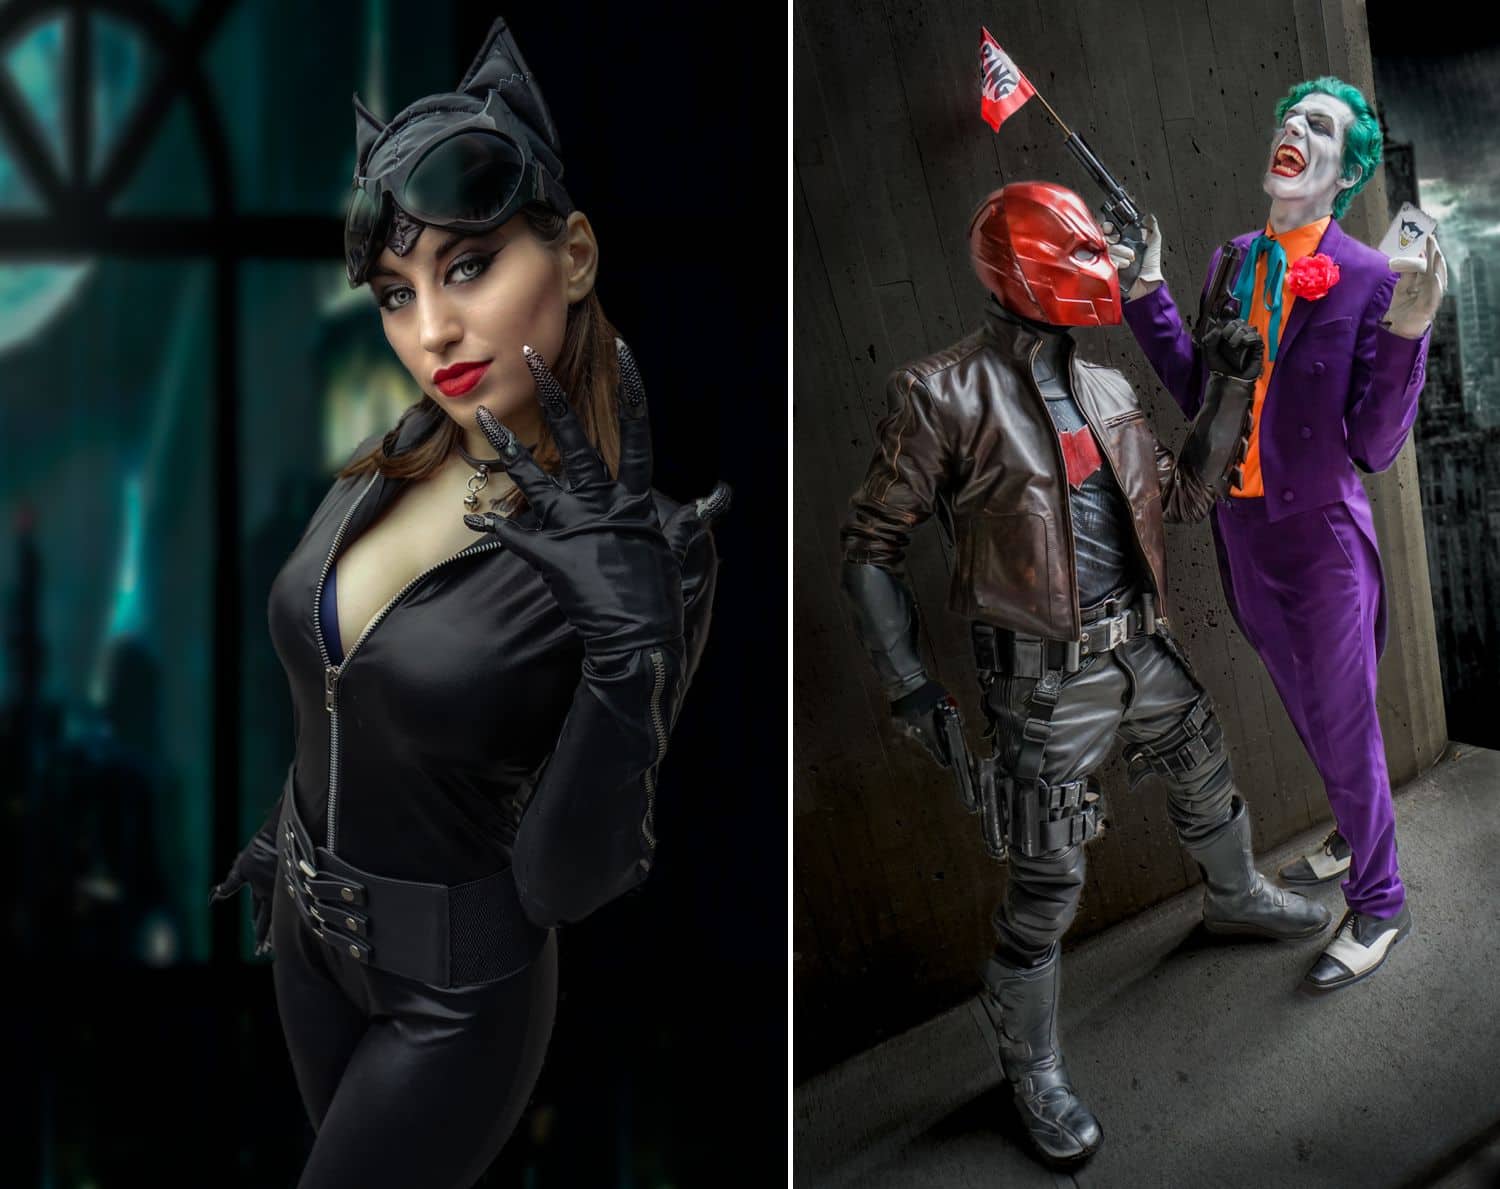 41 Fascinating Photos That Will Inspire More Powerful Portraits: Cosplay Photographer Joe Alfano